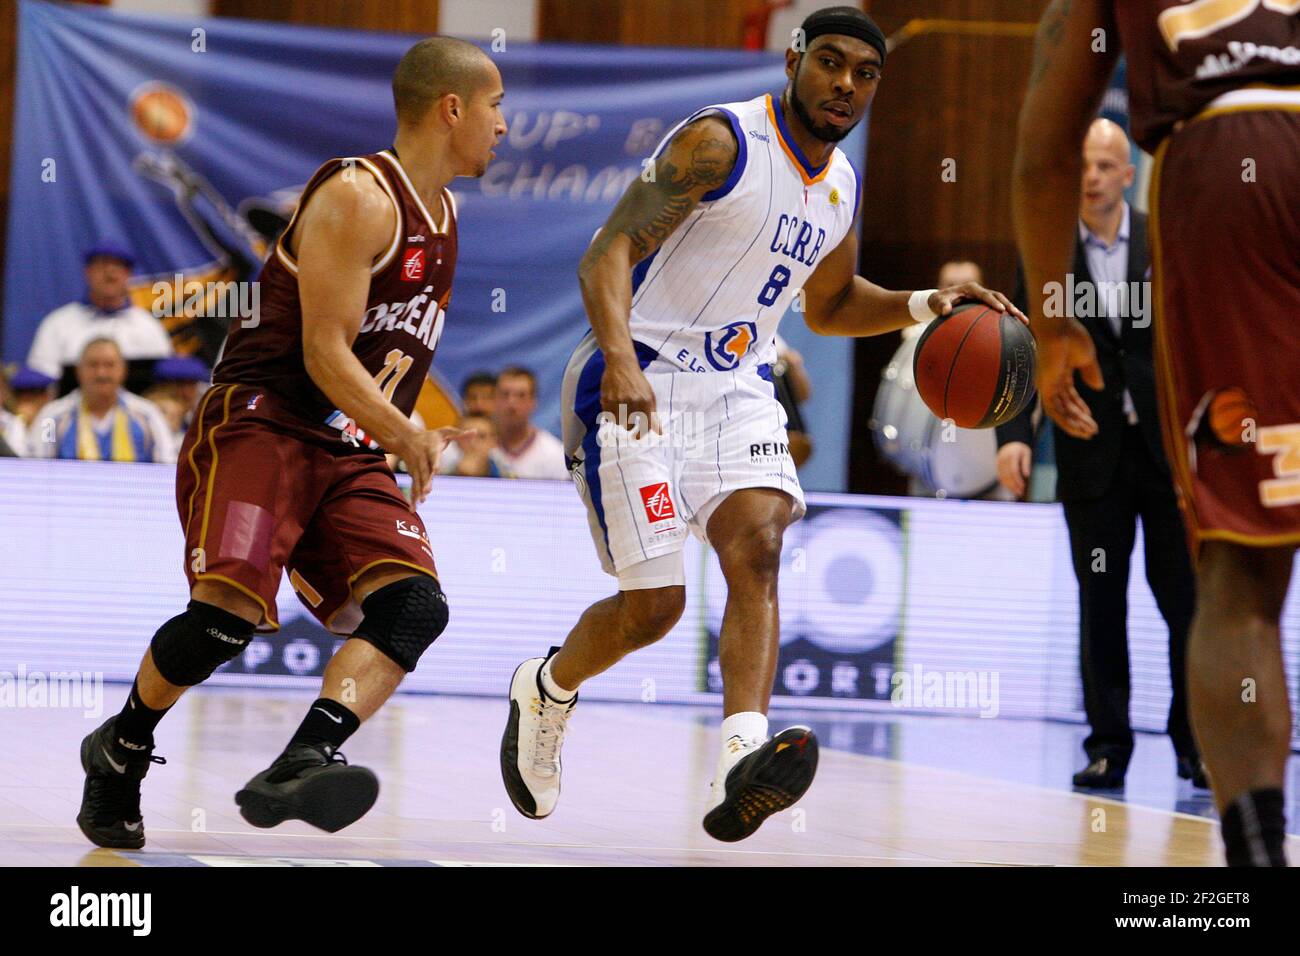 Lionel CHAMLERS (8 CCRB) and Marc-Antoine PELLIN (11 OLB) during the French  Pro-A basket-ball , CCRB (Champagne Chalons Reims Basket) v Orleans (OLB),  at Salle Rene Thys in Reims, France, on November